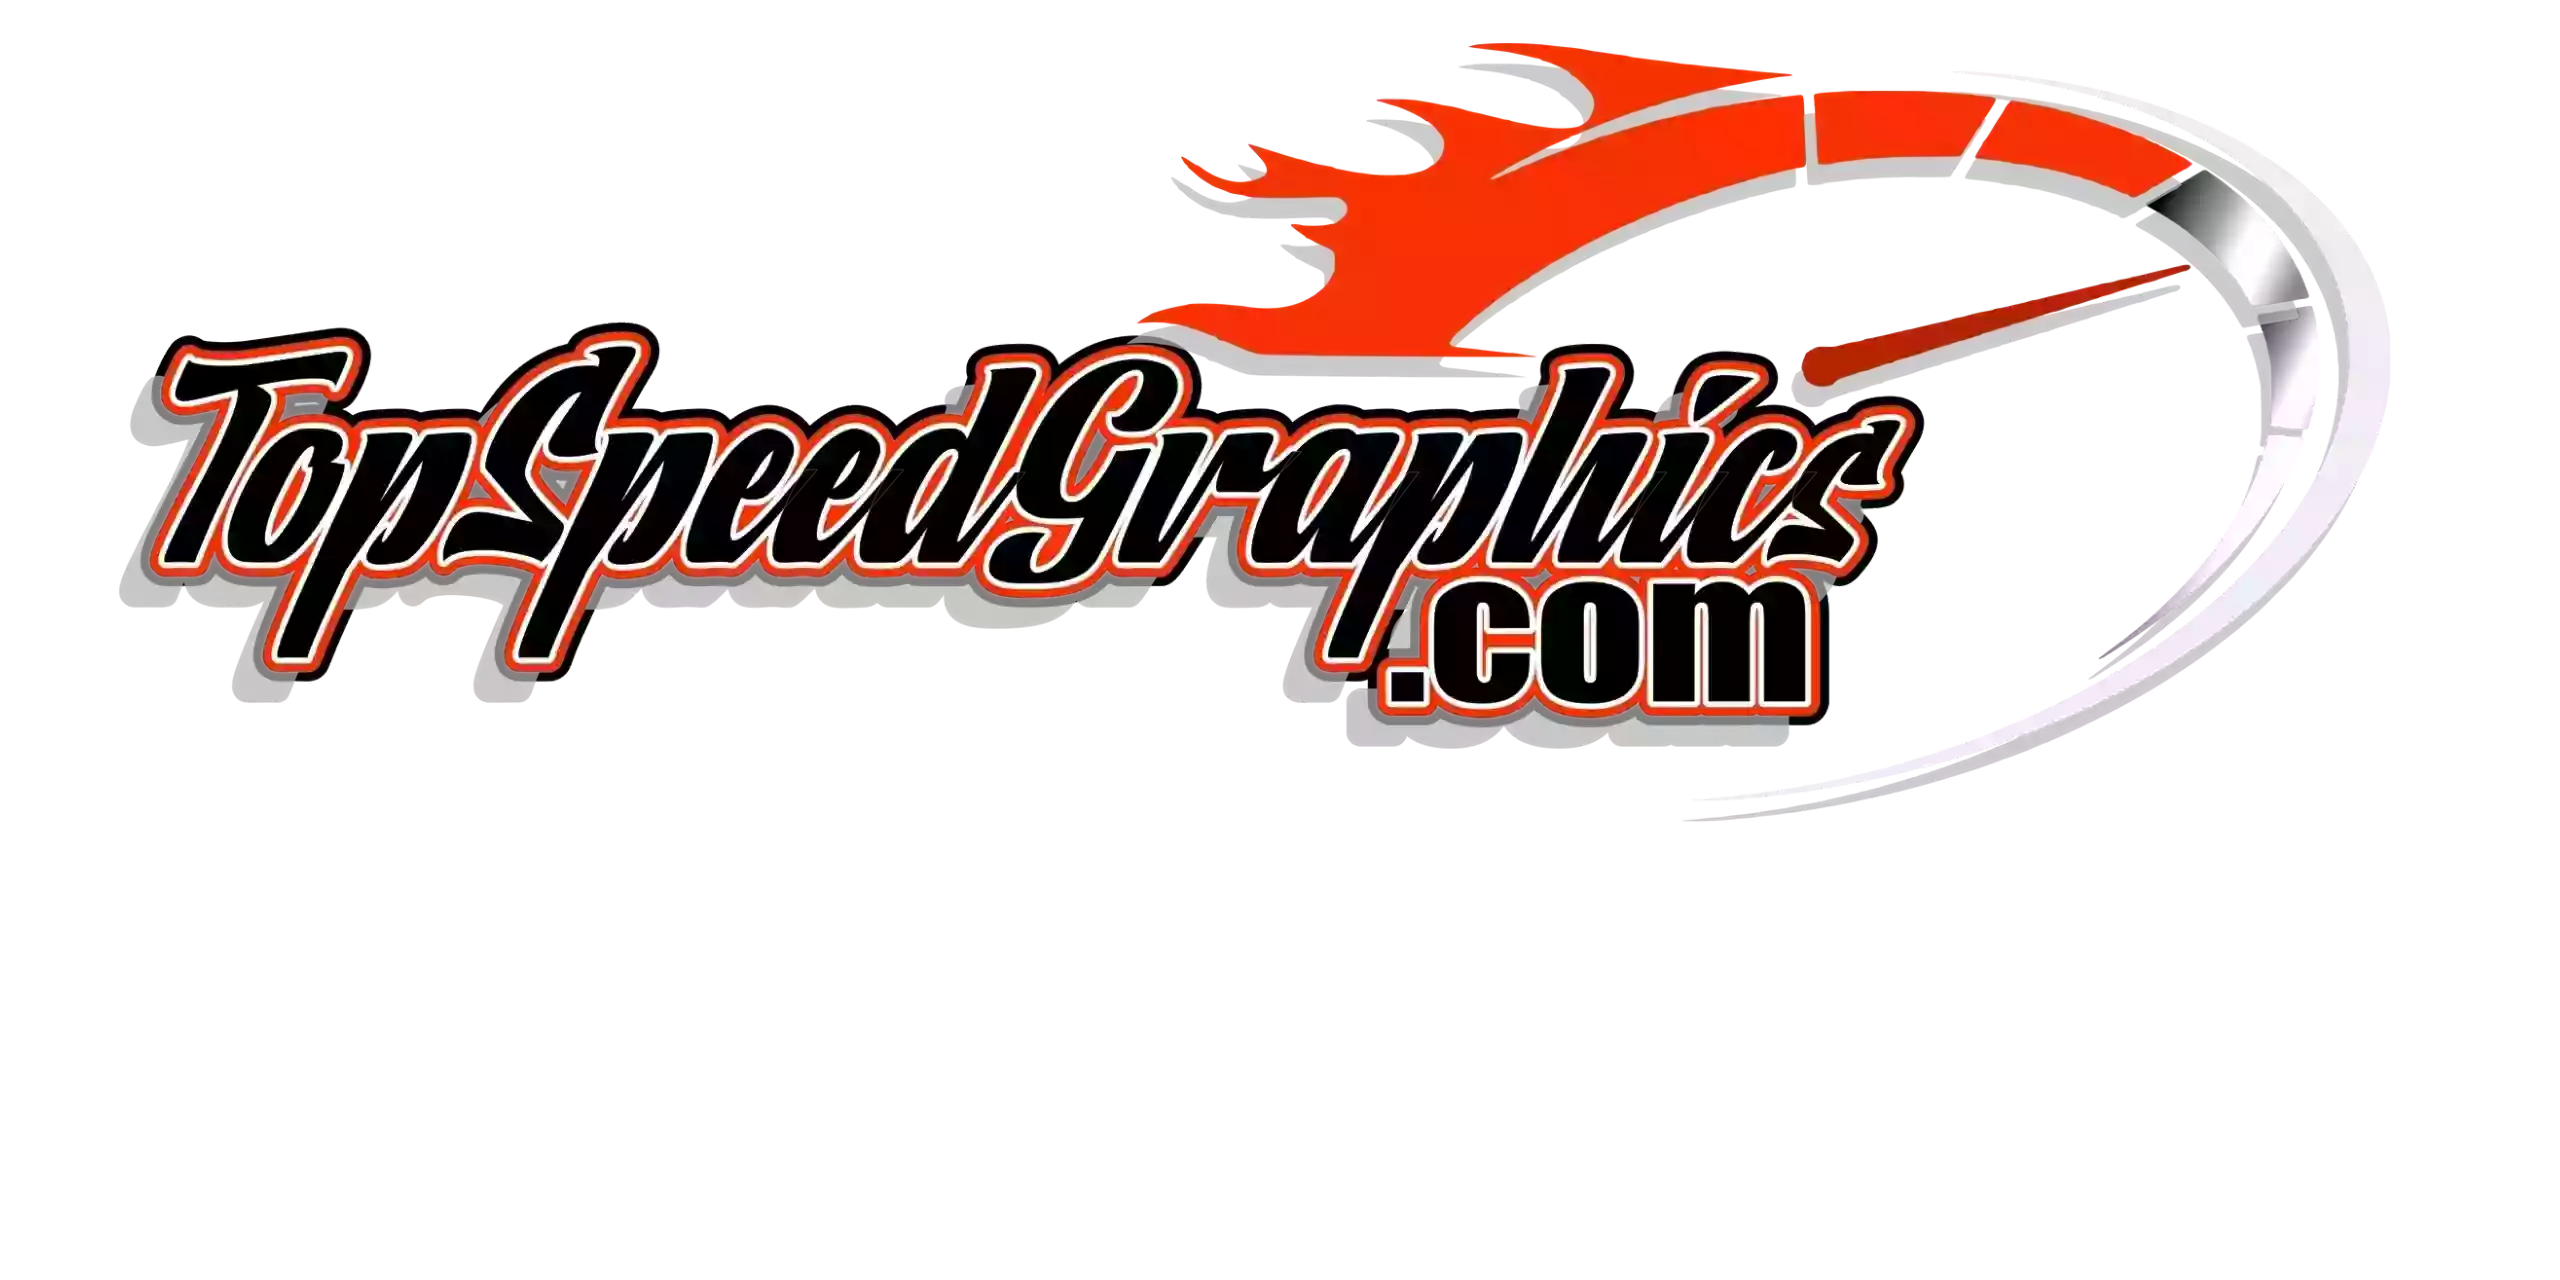 Top Speed Graphics (Signs, Banners, Wraps, & More!)